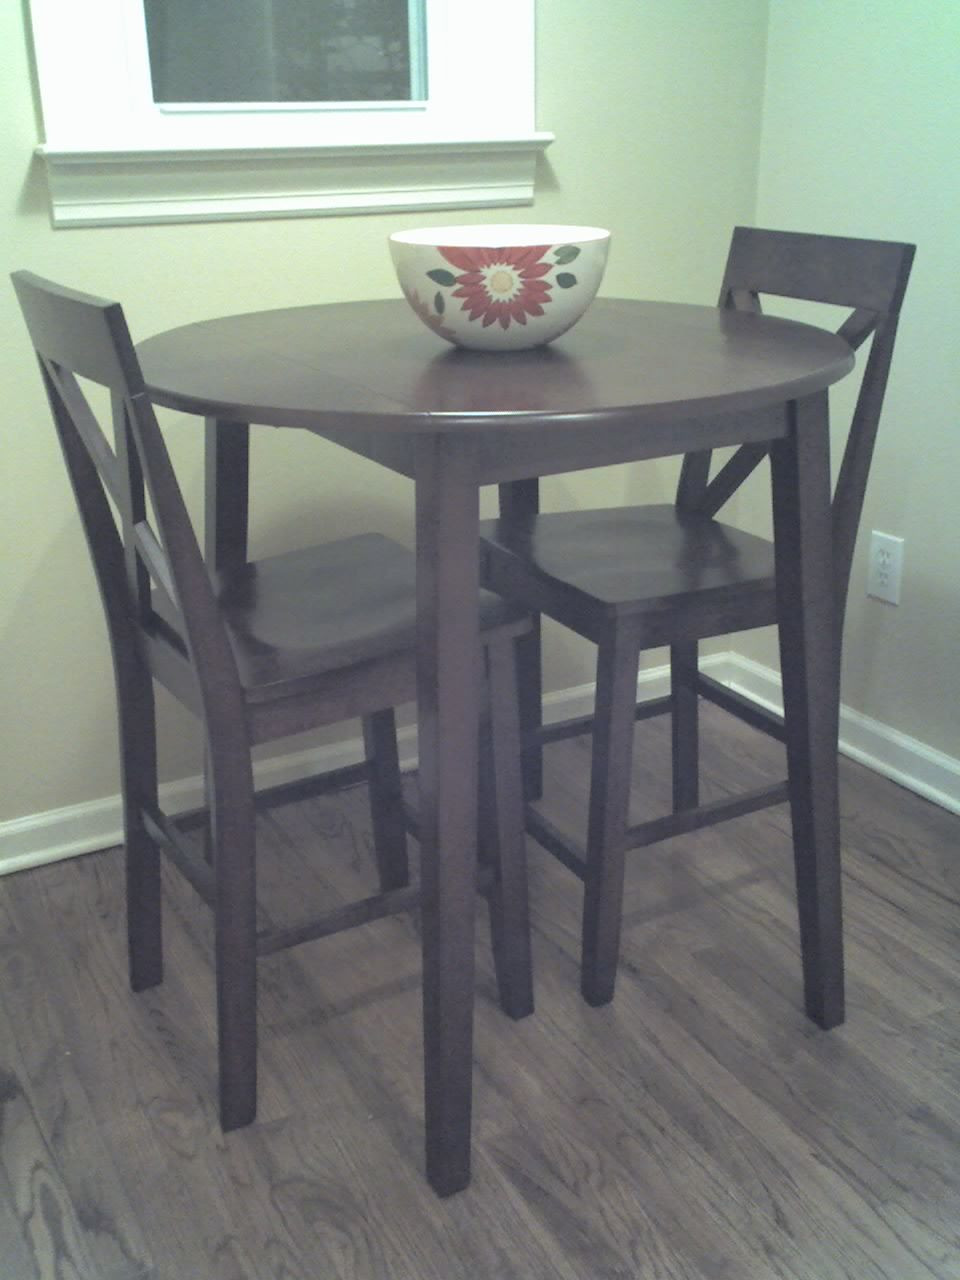 Small Kitchen Table With Stools
 Tall kitchen table with stools Mahogany in KeepItMovin s